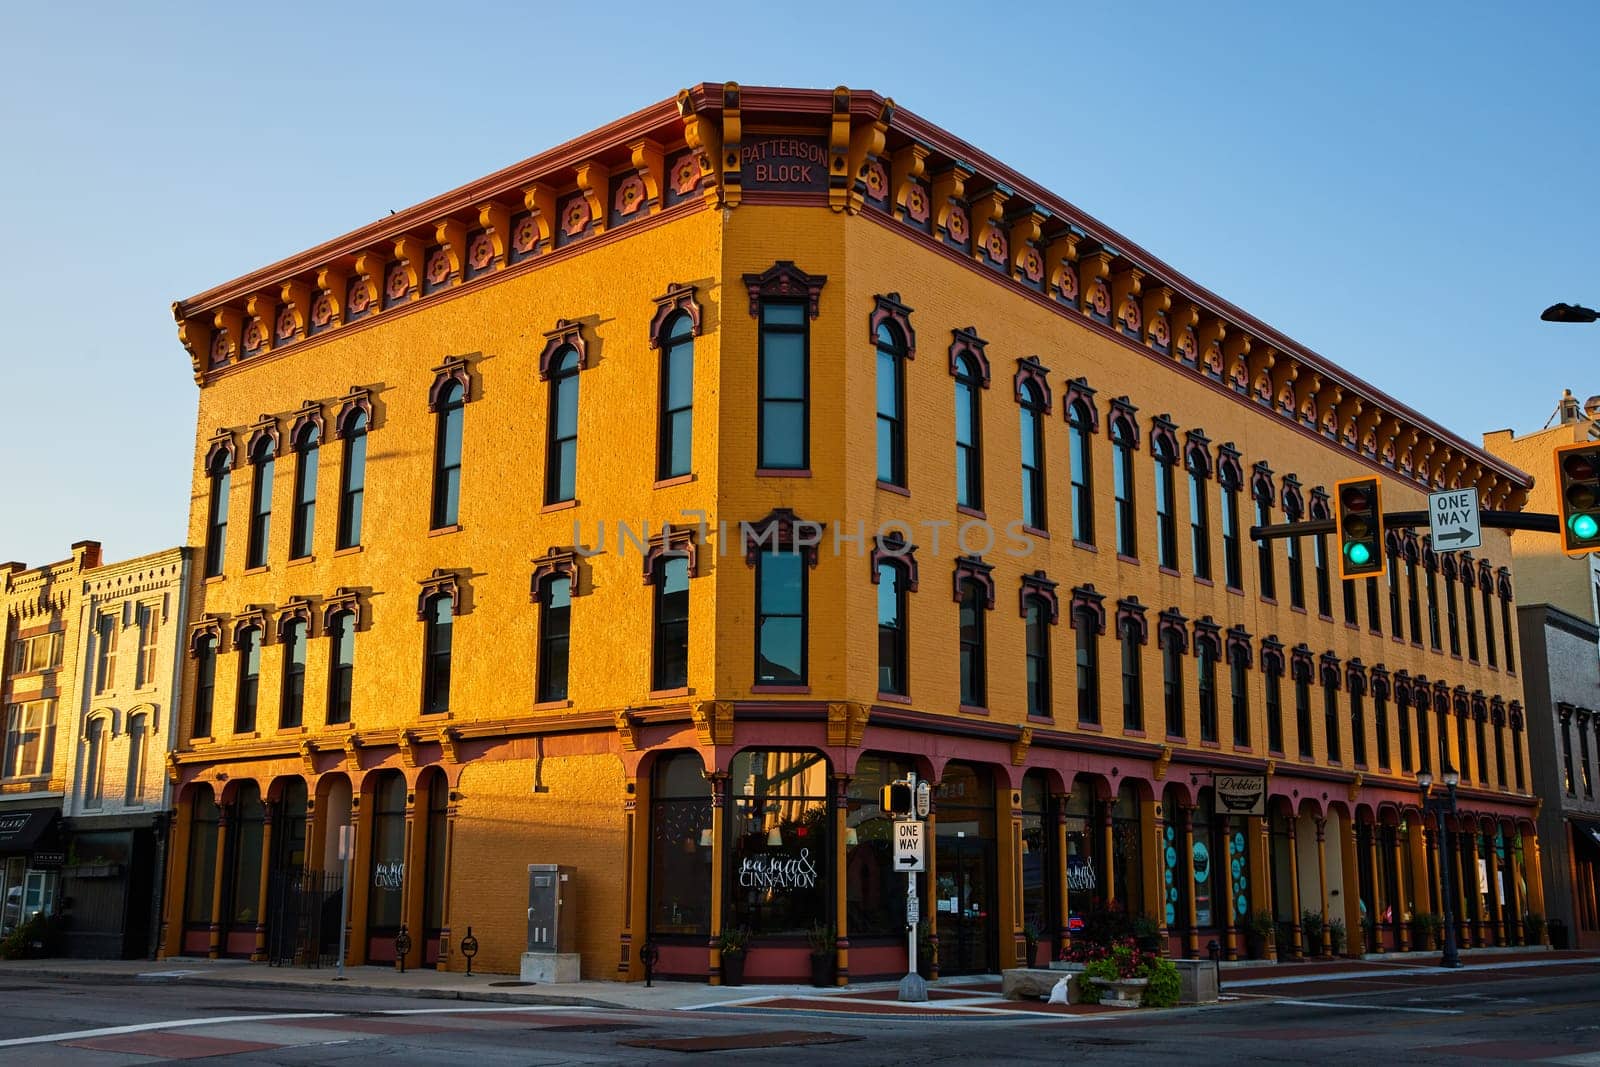 Golden Hour Glow on Historic Patterson Block, Muncie by njproductions